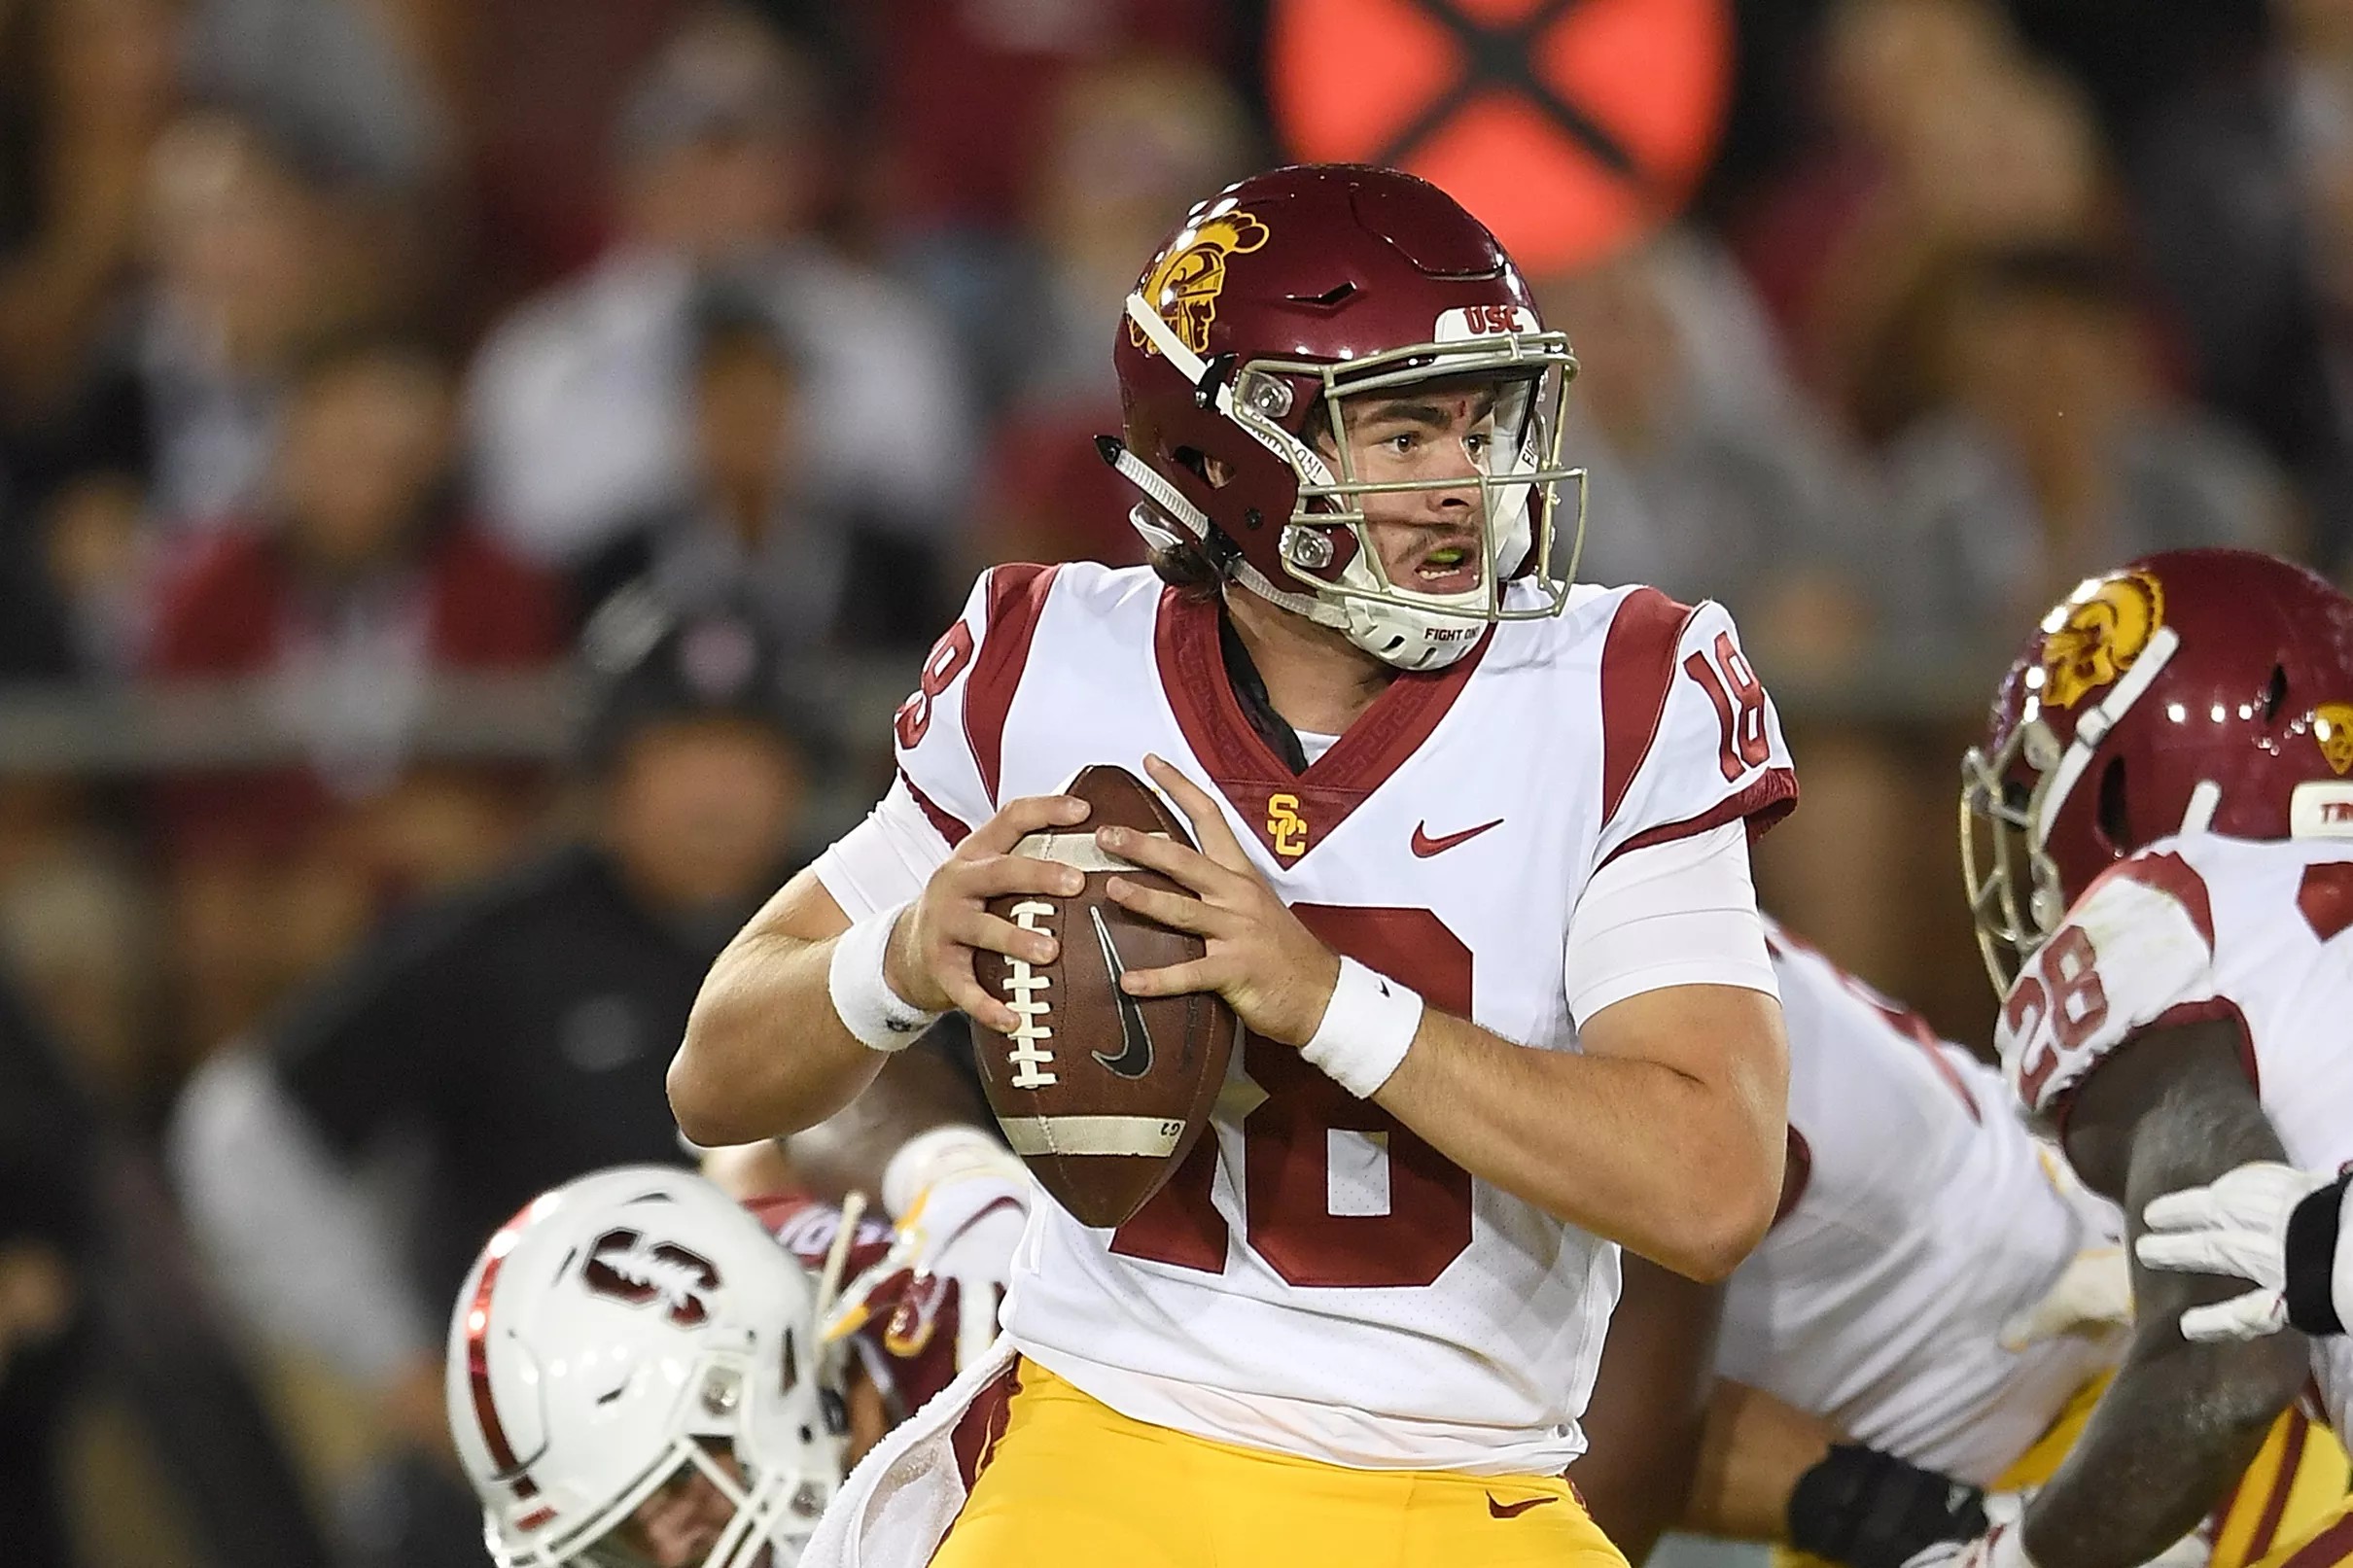 USC Football falls to No. 22 in latest AP ranking